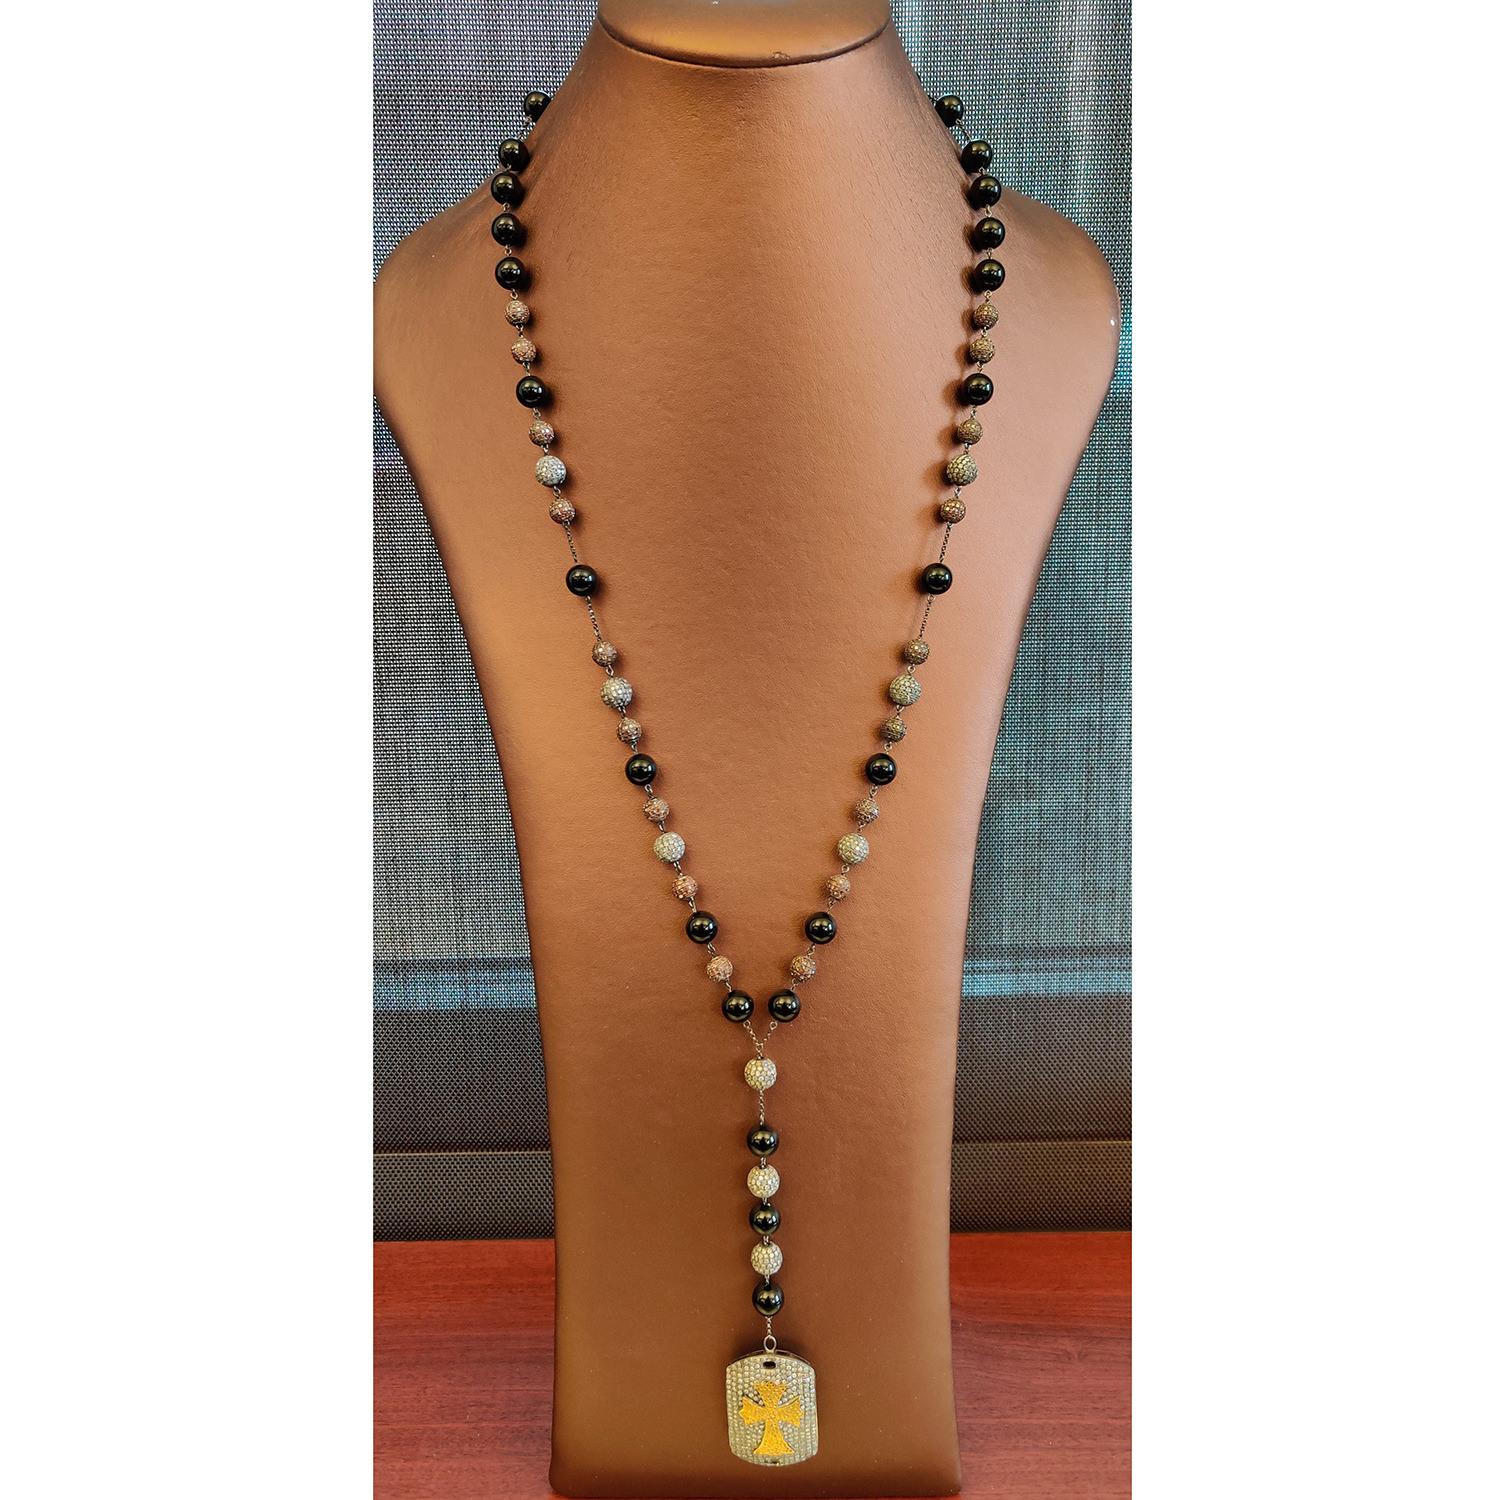 Art Deco Diamond Beads Onyx Necklace with Cross Design Pendant Made in Gold & Silver For Sale